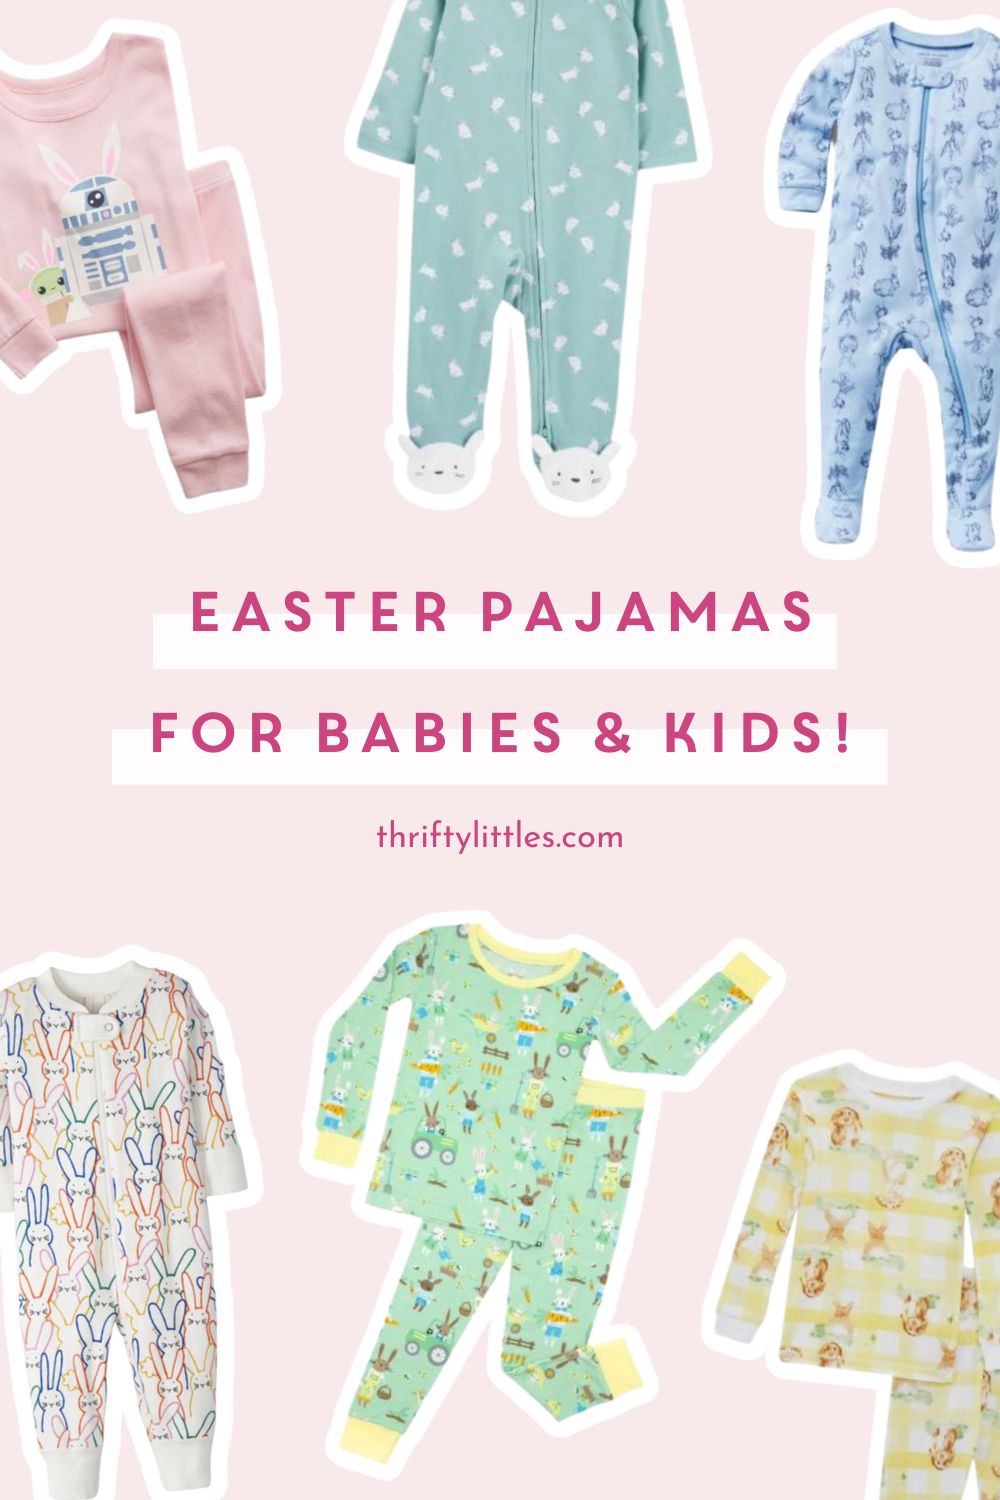 Easter Pajamas for Babies and Kids!